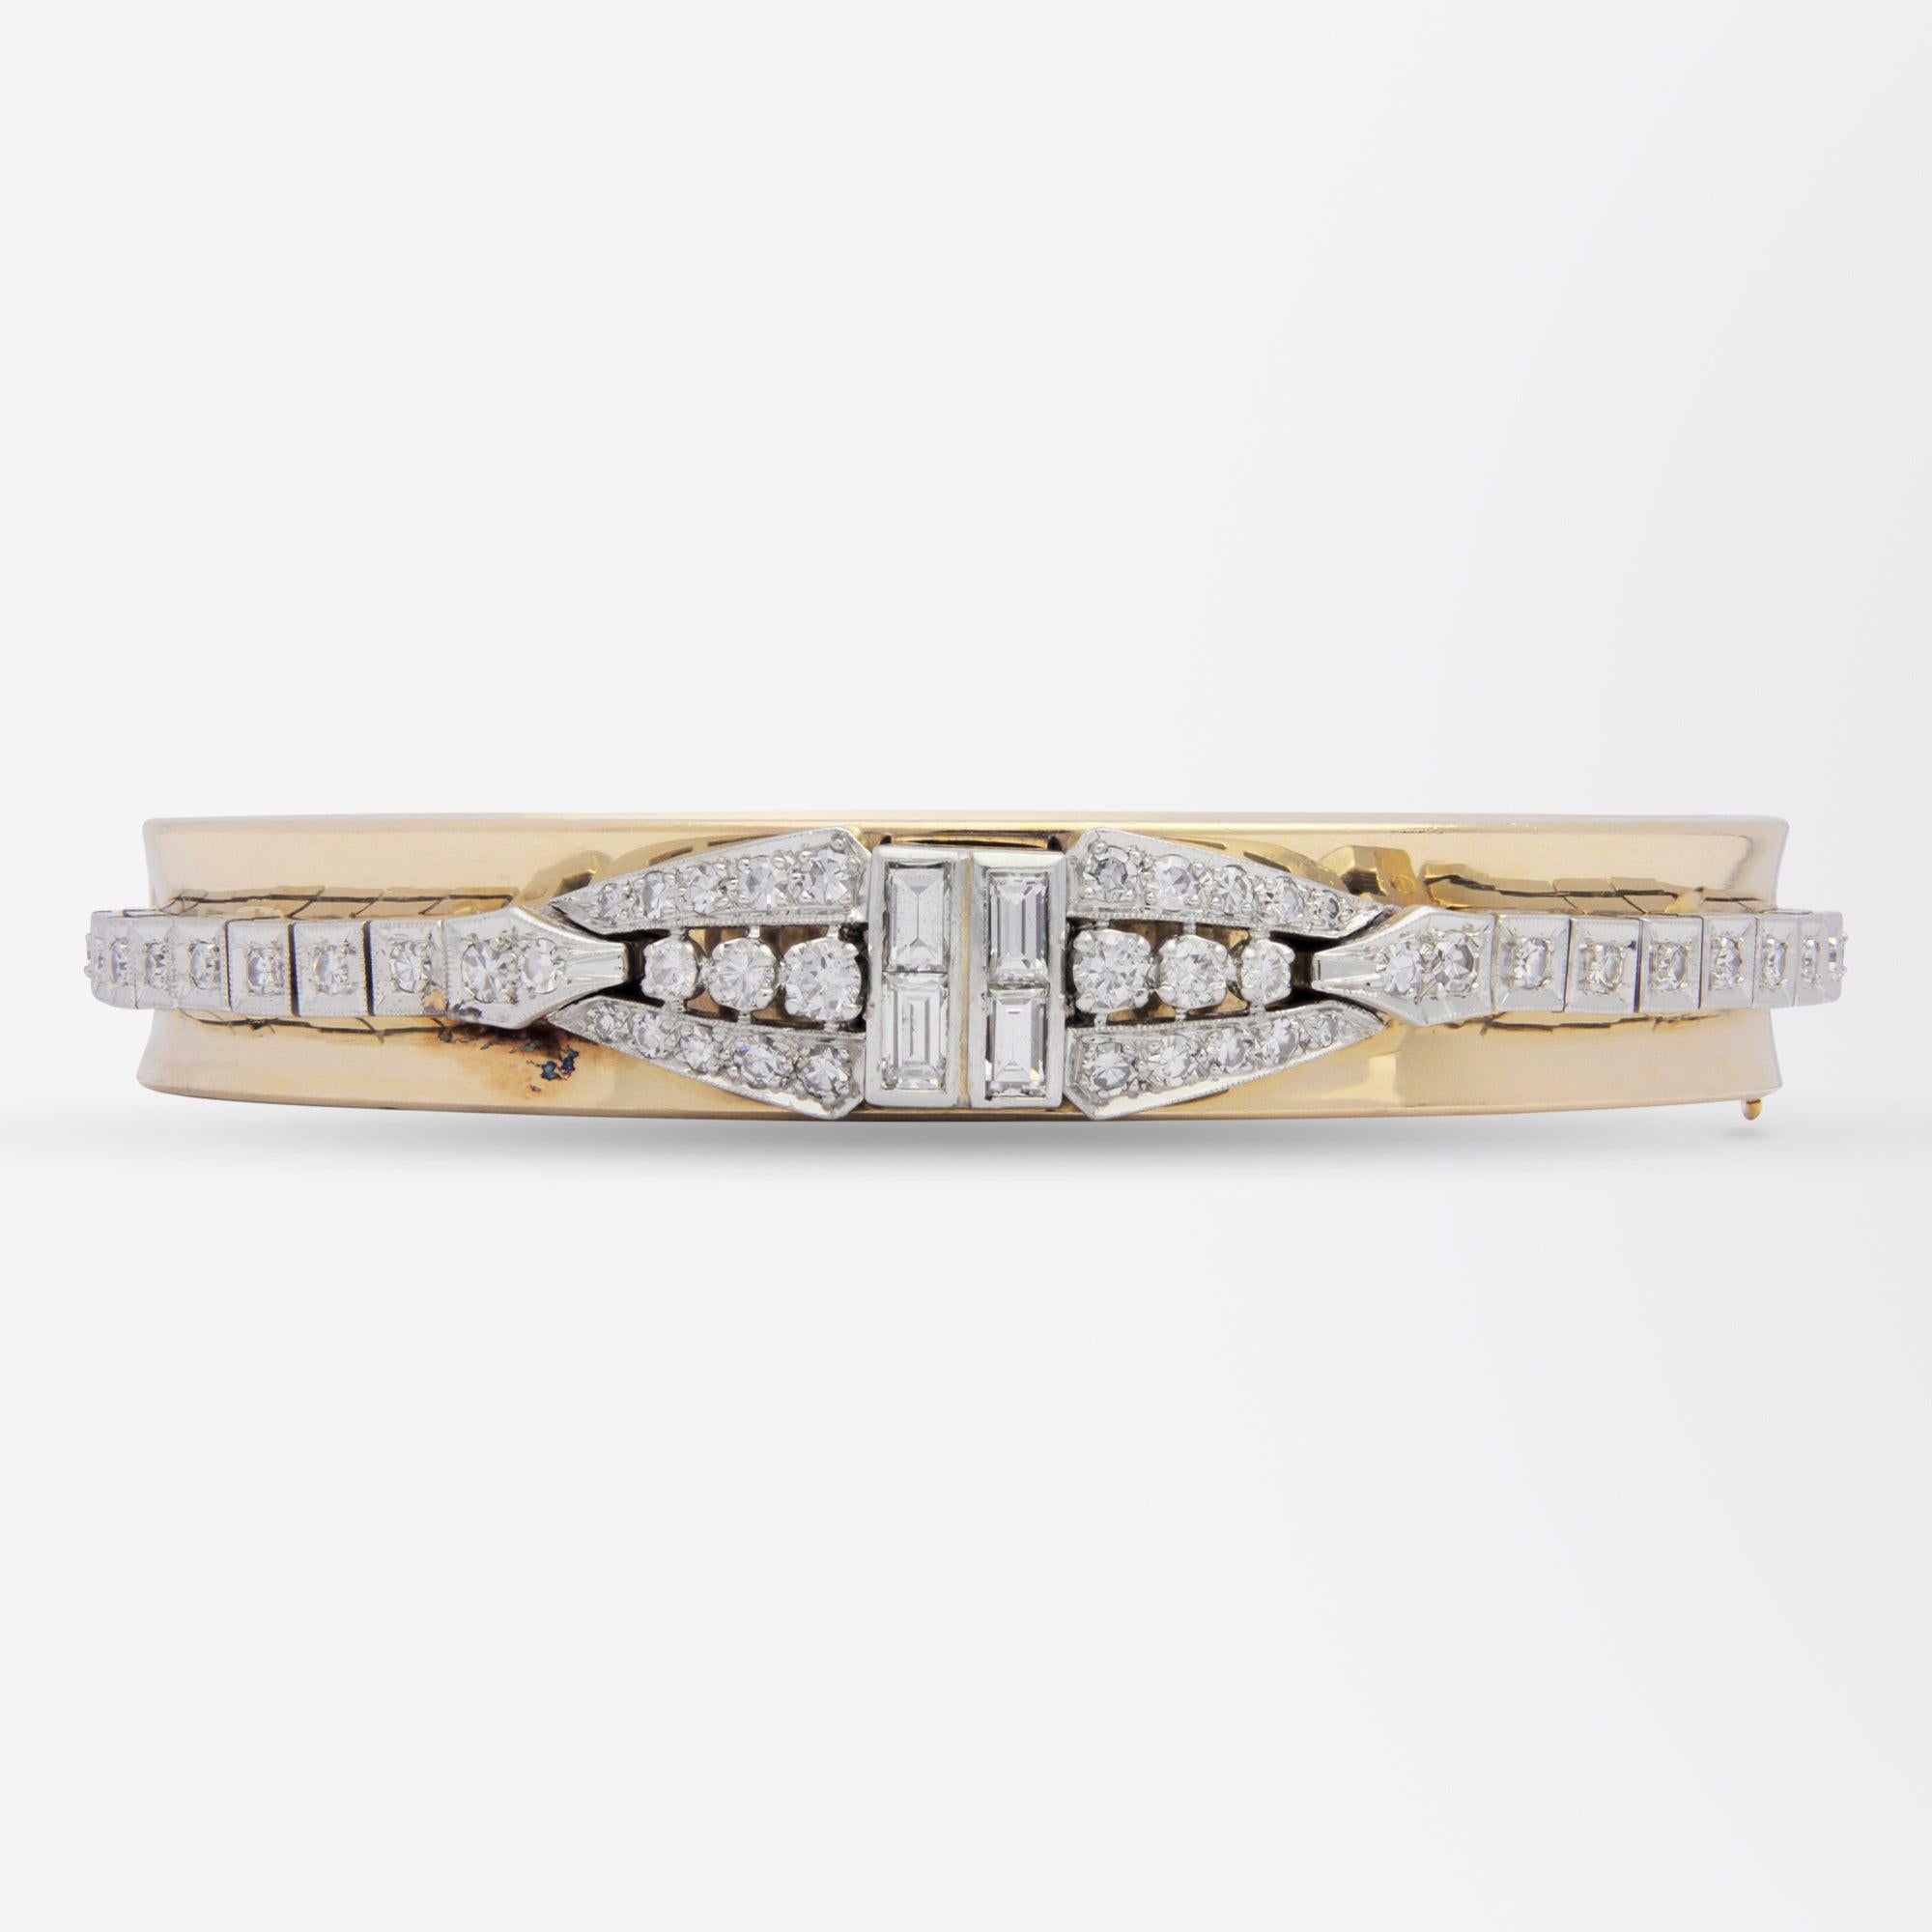 A wonderful 14 karat yellow gold hinged bangle set with a diamond mounted 14 karat white gold Art Deco bracelet. This unusual bangle has carefully combined components from an original Art Deco diamond bracelet onto a modern bangle which is more